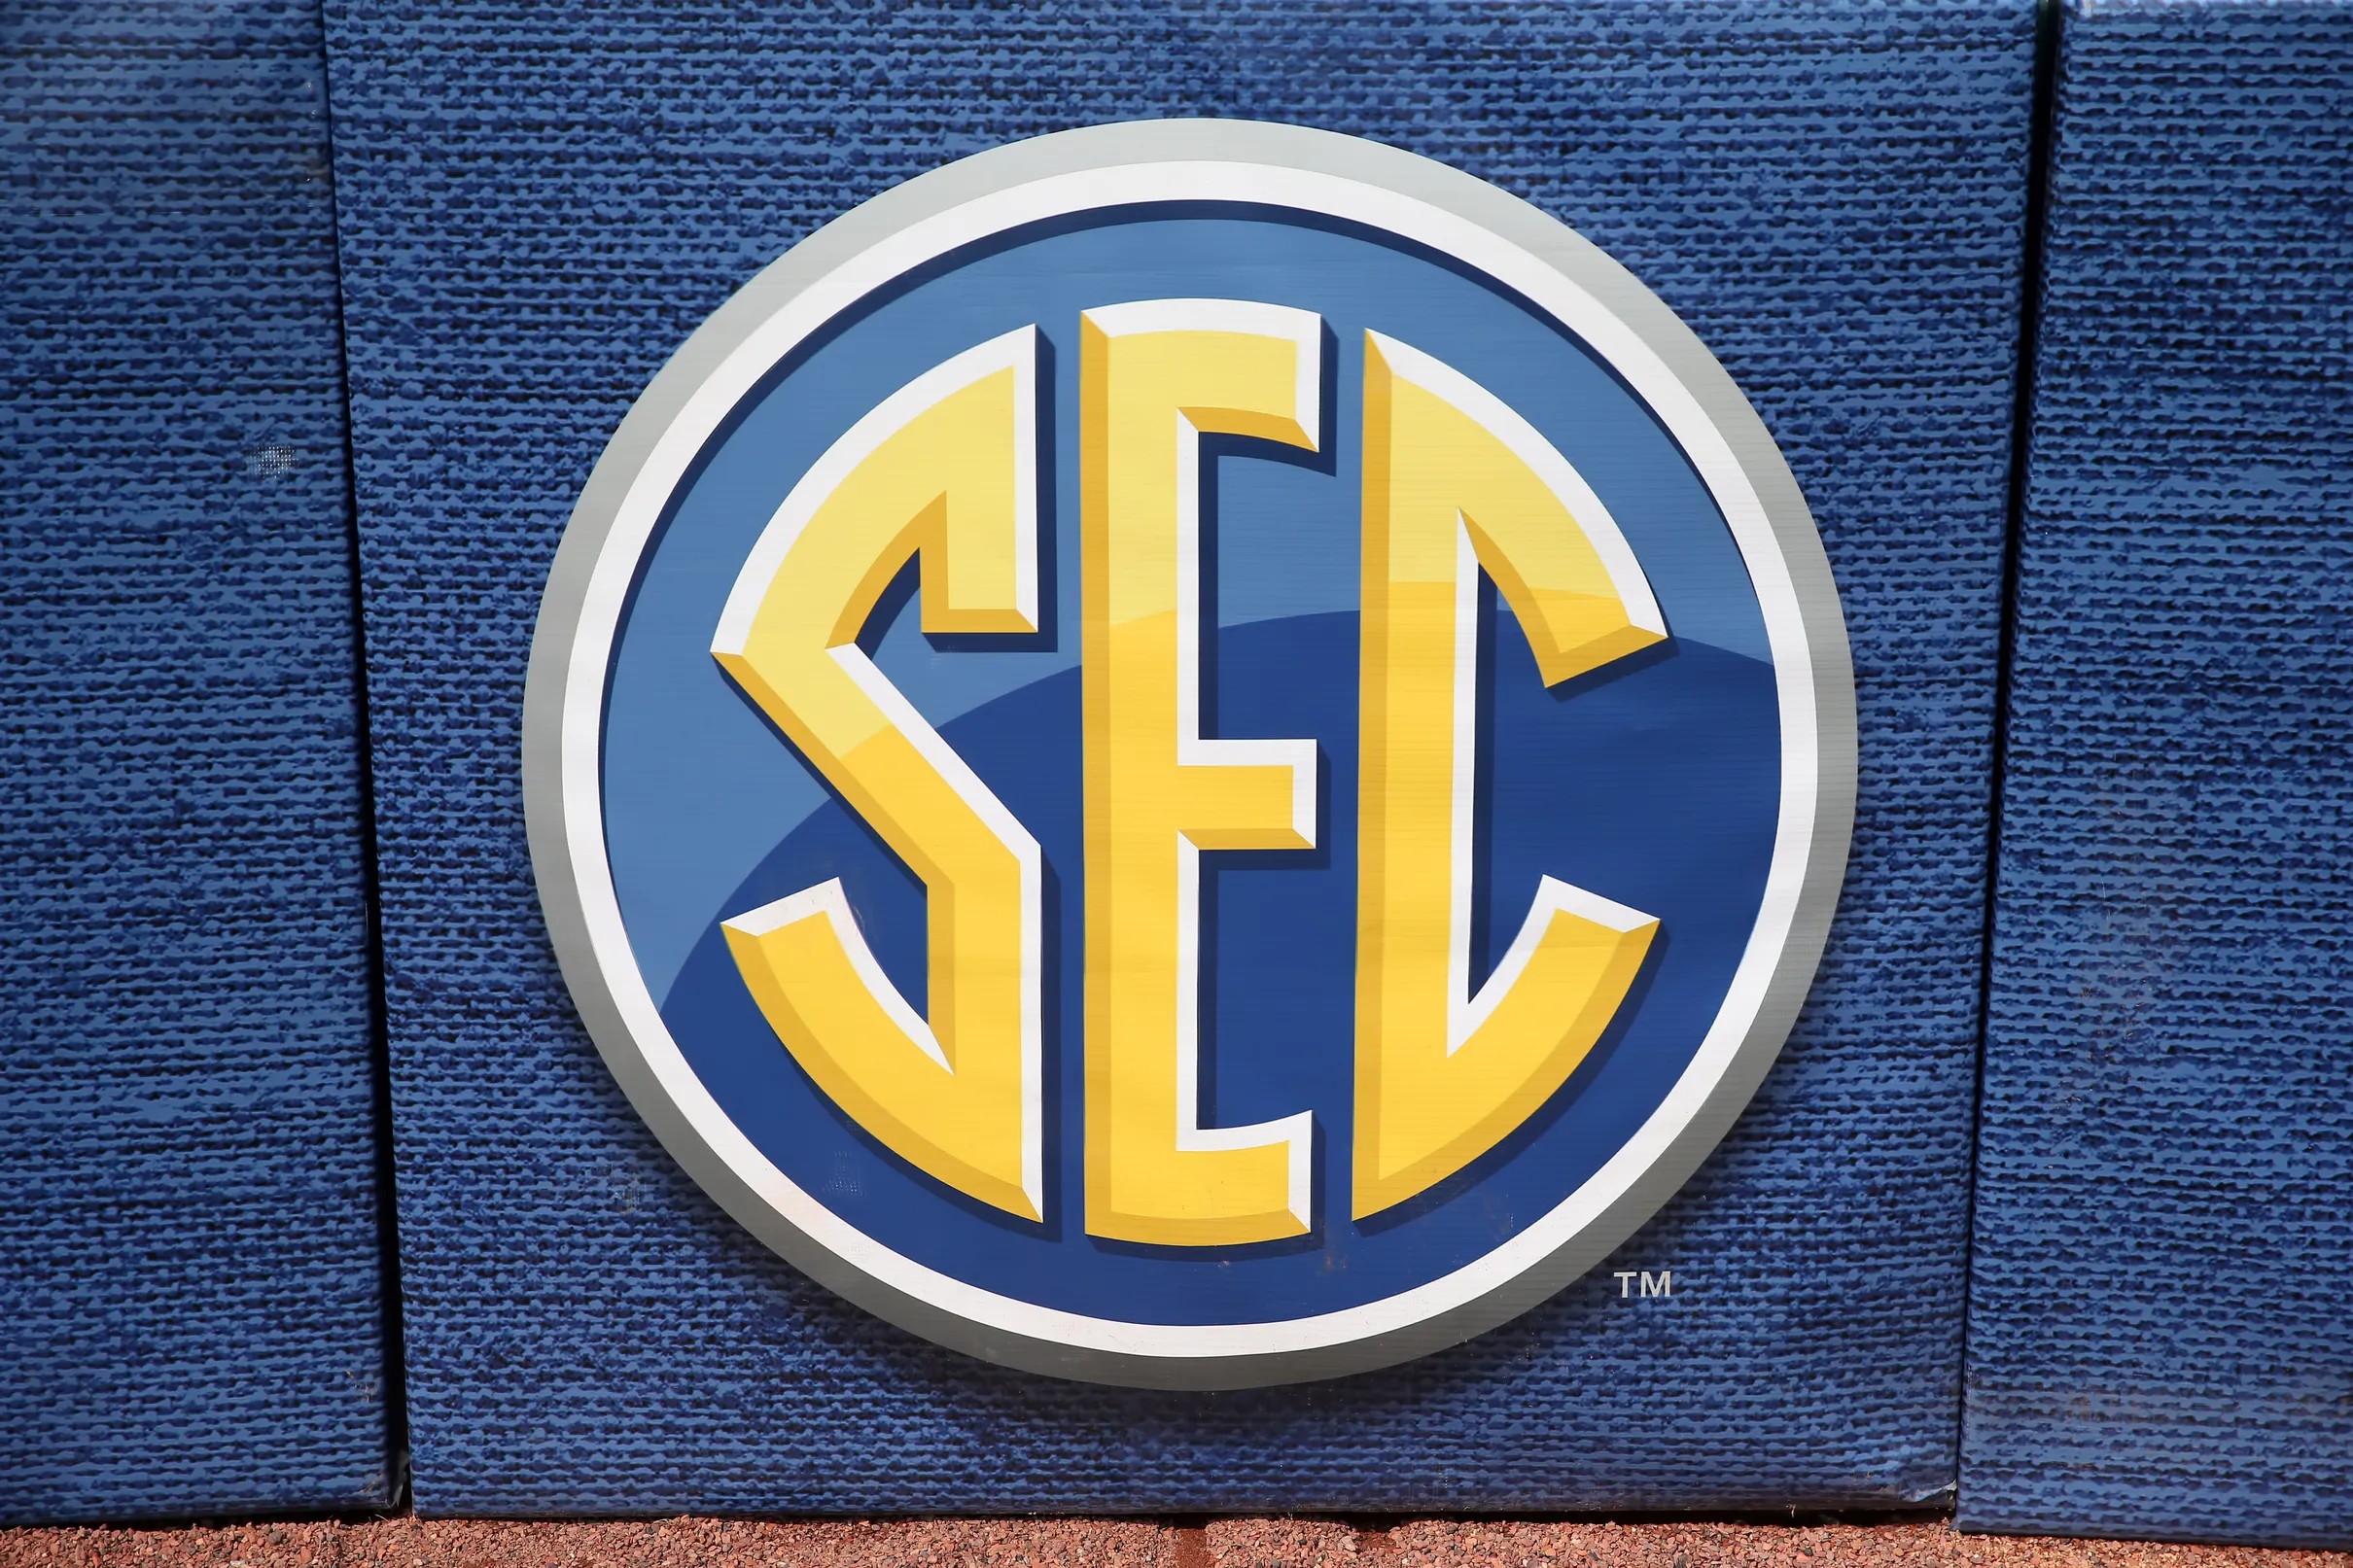 SEC programs still undecided on future conference scheduling